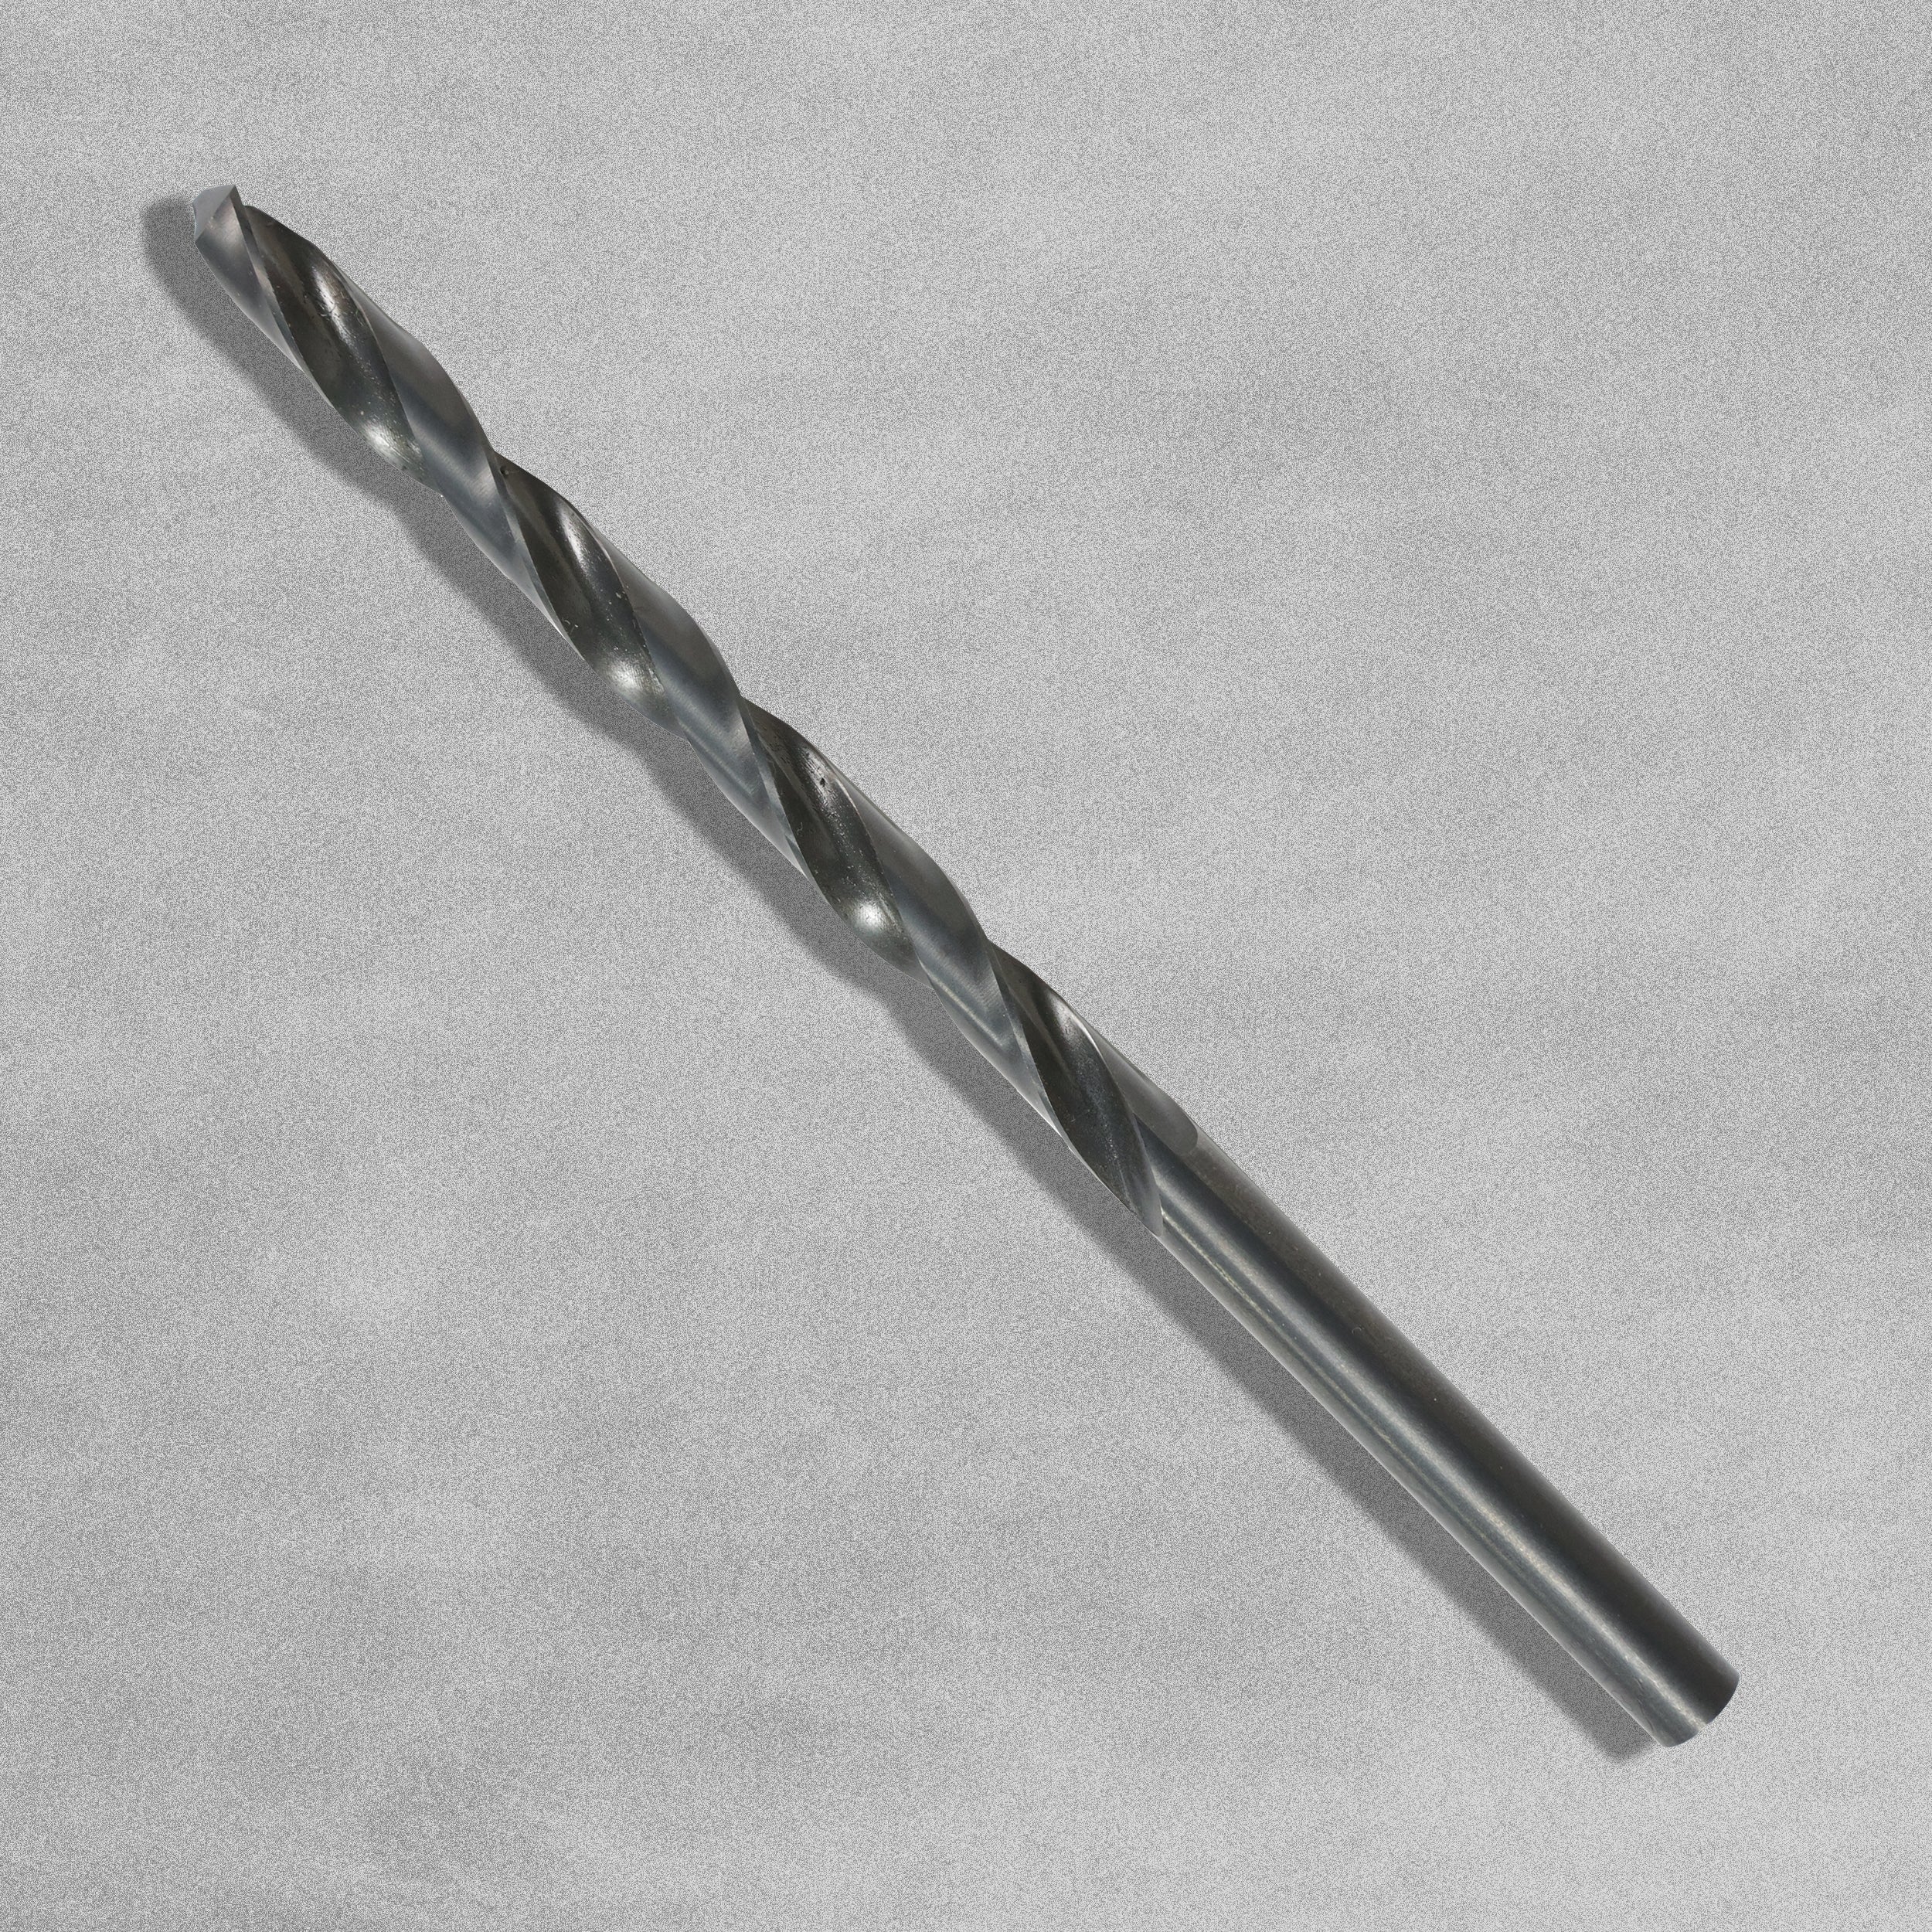 HSS Metal Long Series Drill Bit 8.4mm by BBW Germany, sold by In-Excess